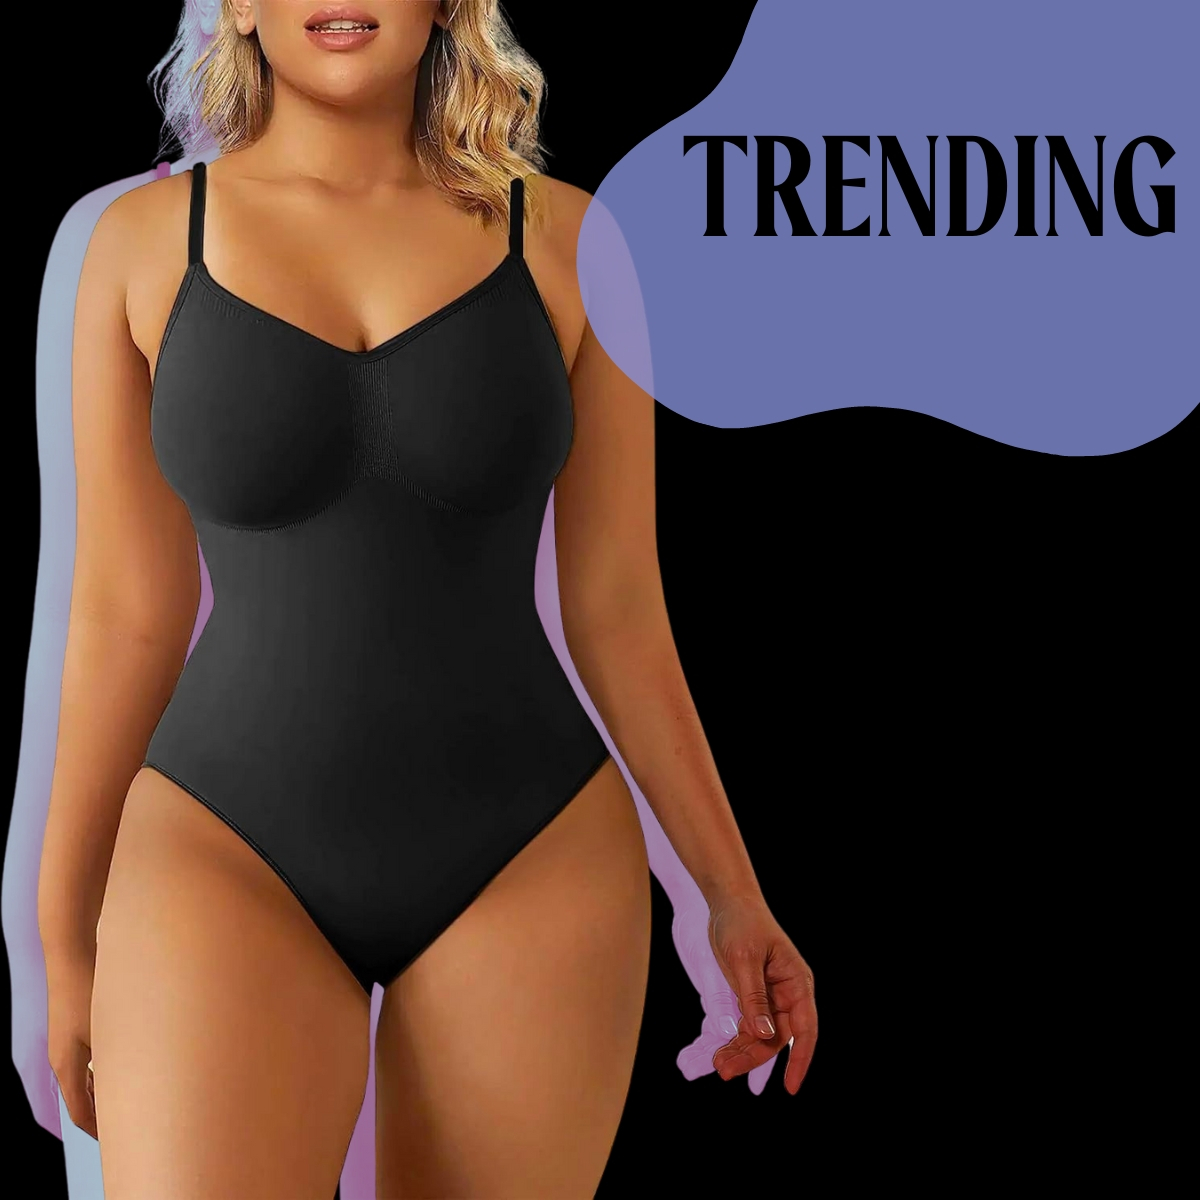 This Shapewear Bodysuit Will Help You Look Snatched for Spring